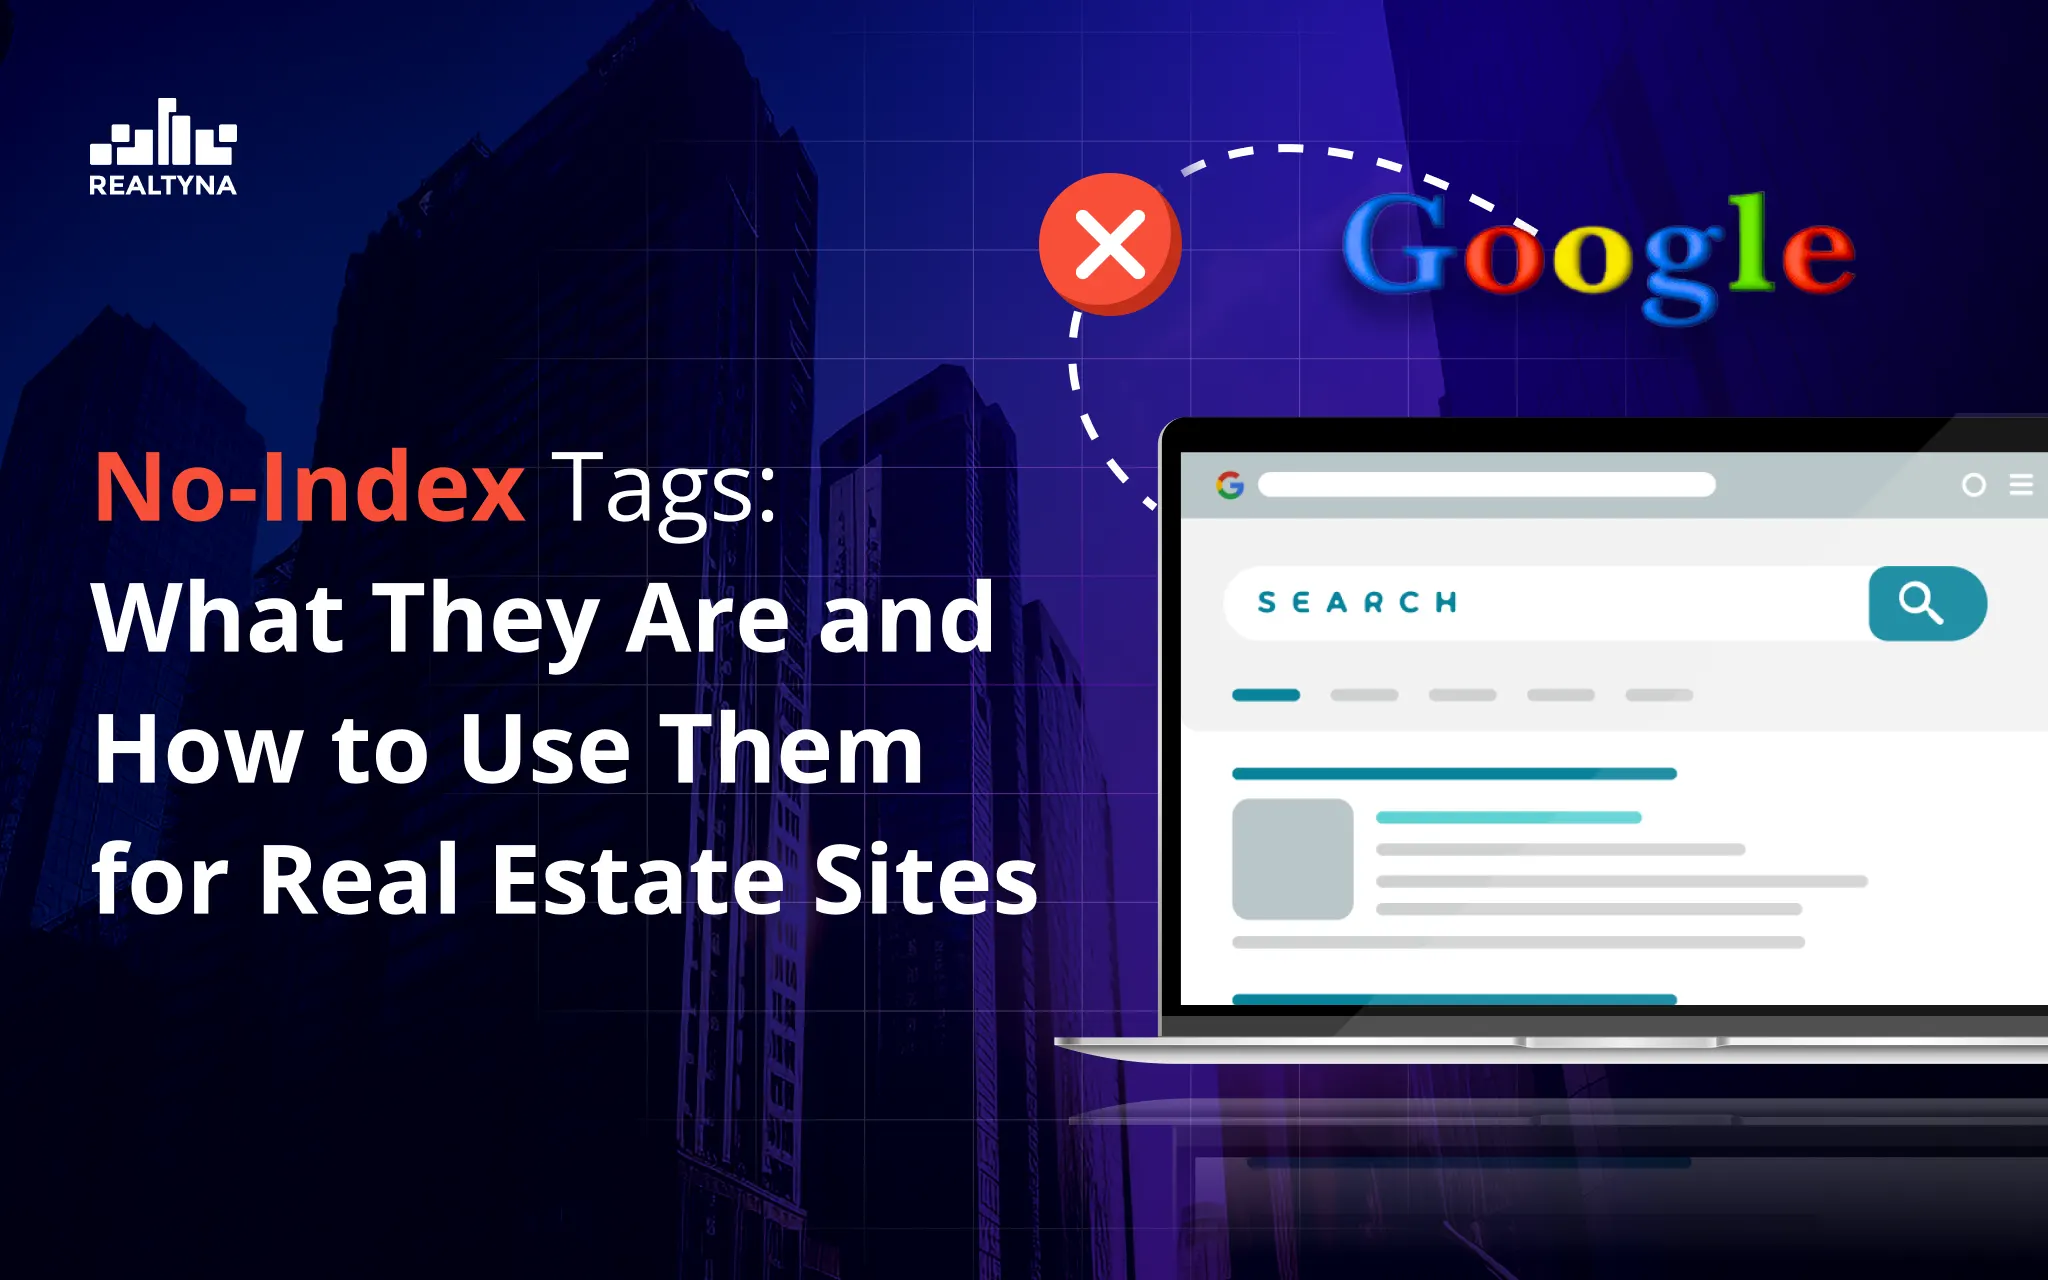 No-Index Tags What They Are and How to Use Them for Real Estate Sites